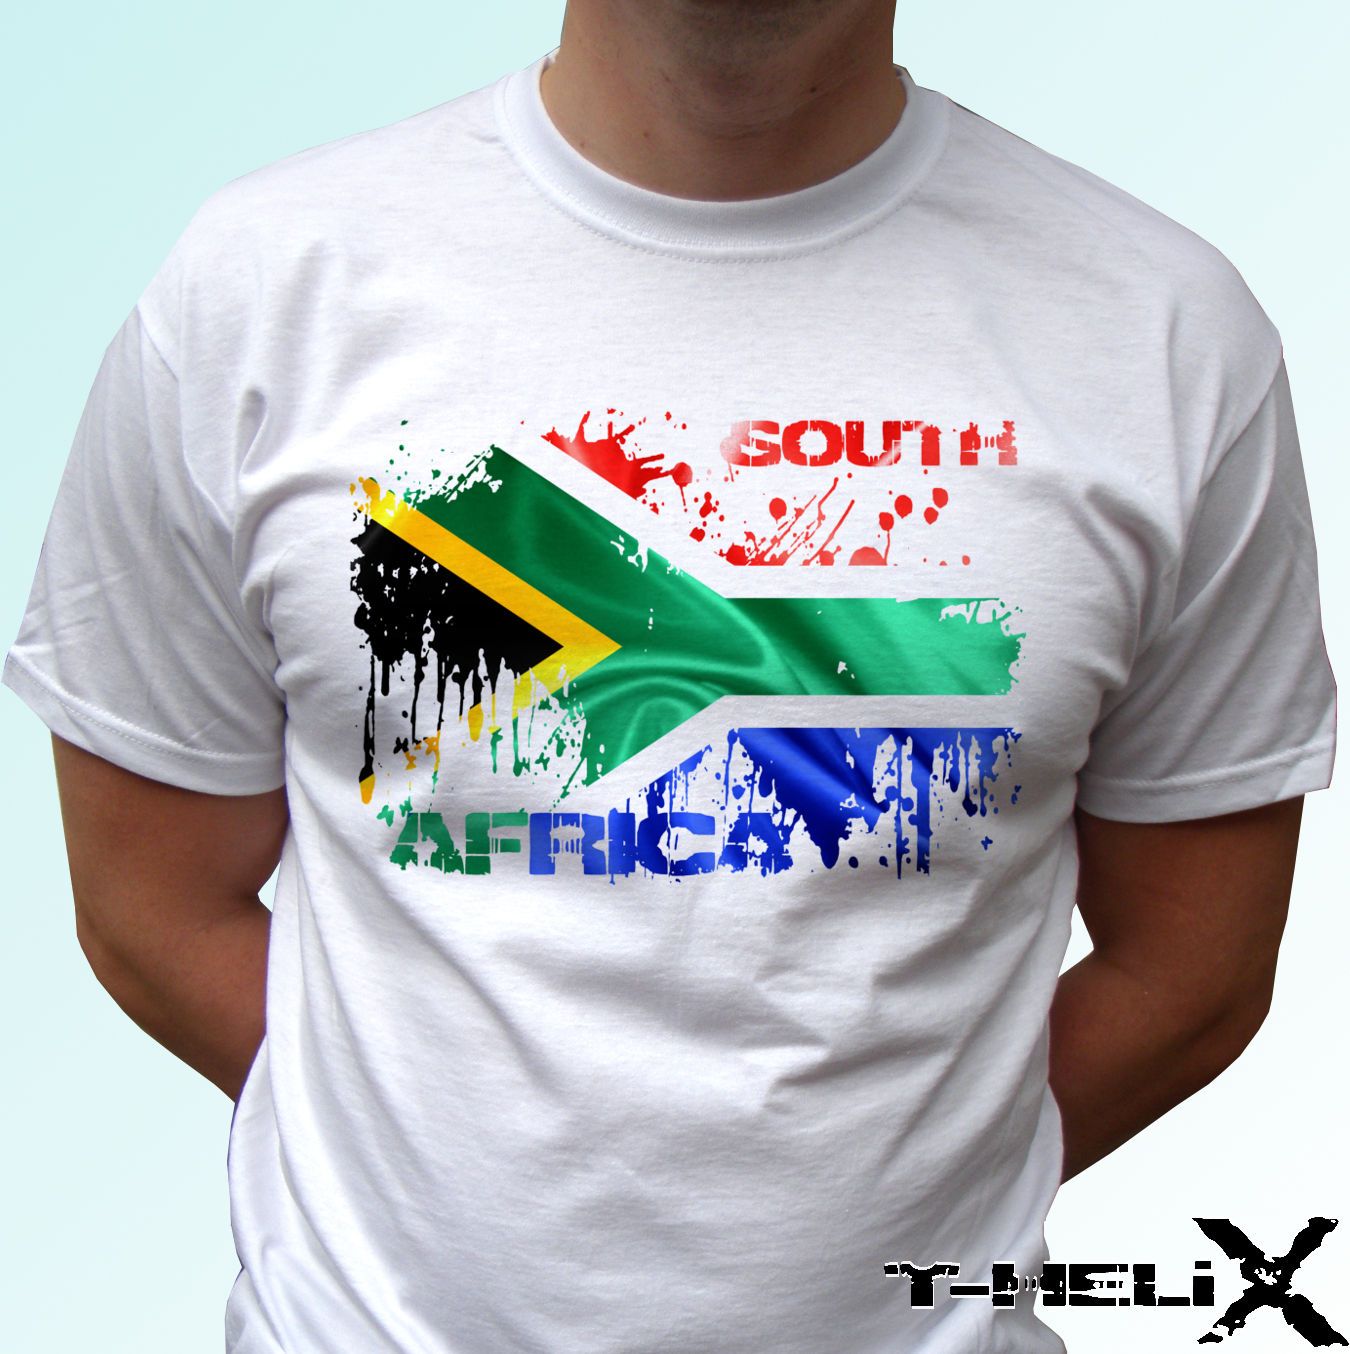 Baglæns Verdensrekord Guinness Book Fra South Africa Flag White T Shirt Top Country Design Mens Womens Kids & Baby  Funny Tops Tee New Unisex Funny Tops From Xuthusstore, $24.2 | DHgate.Com